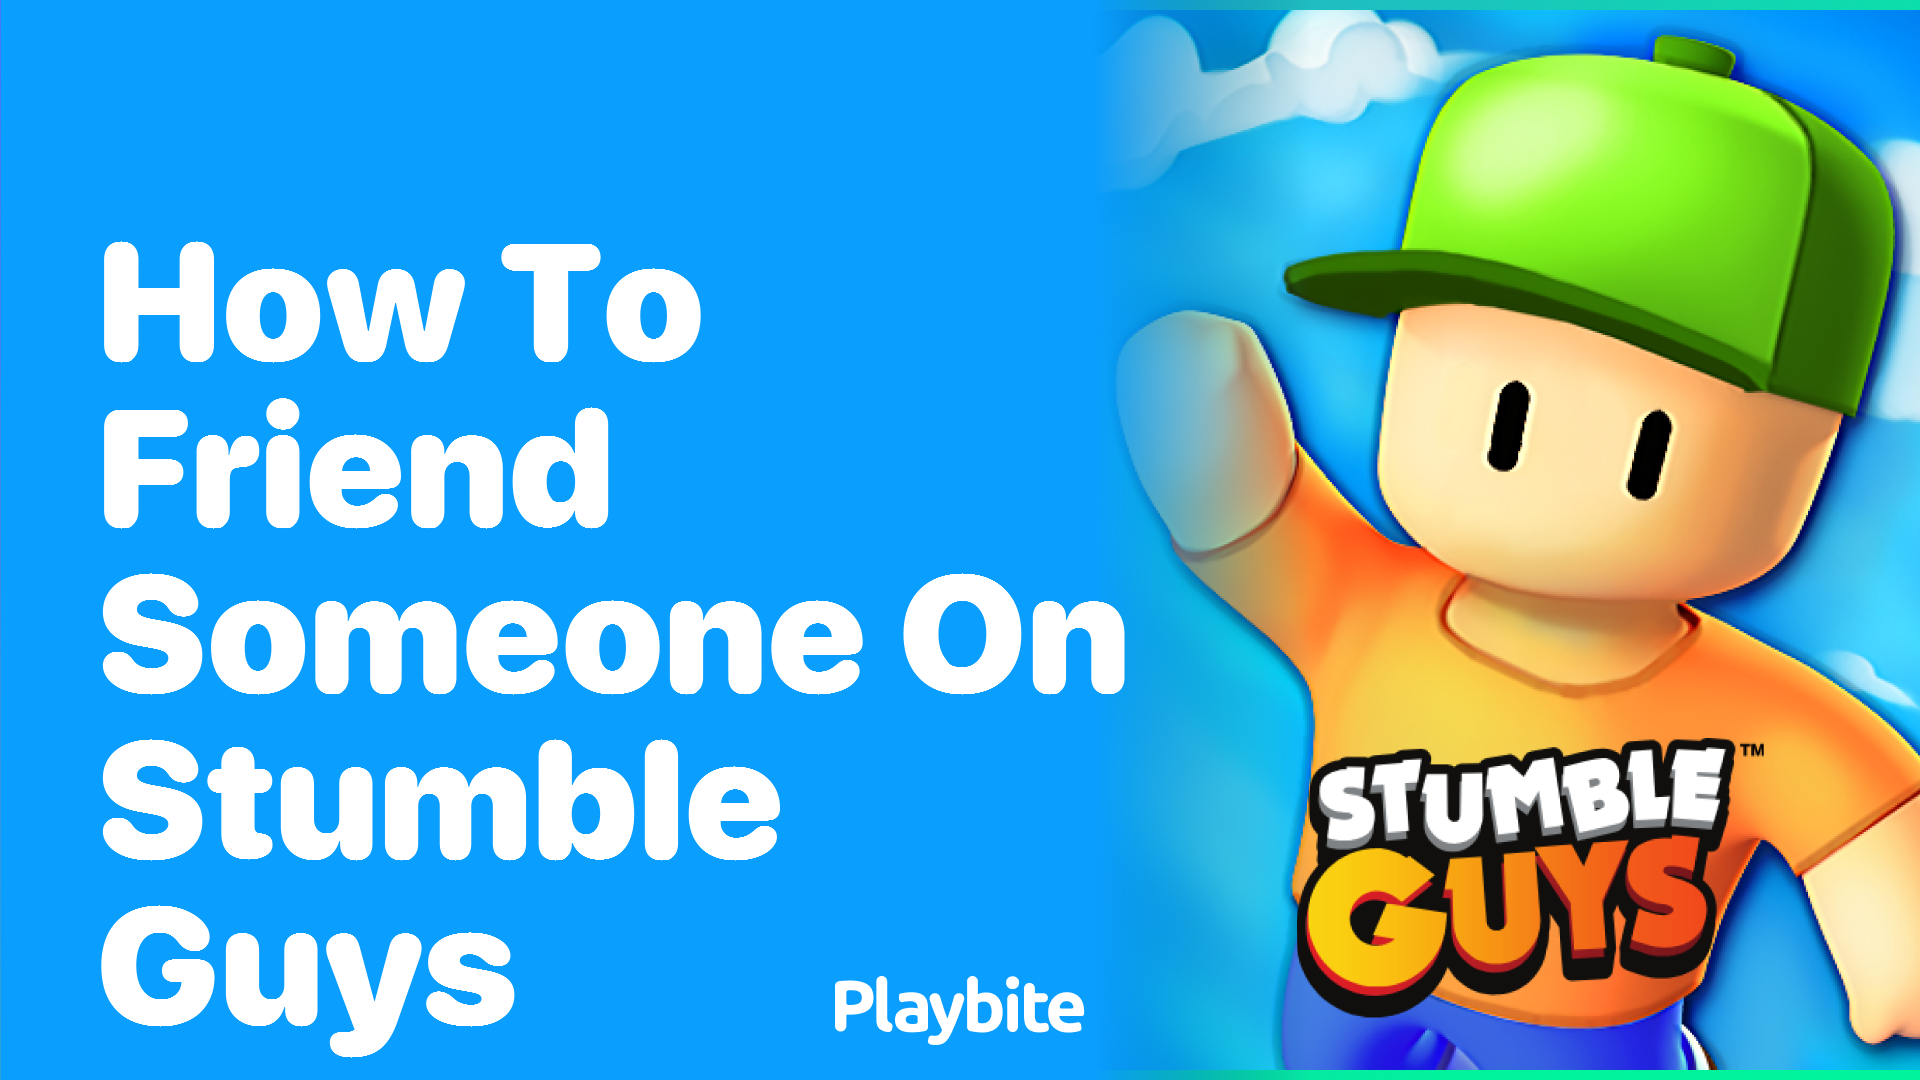 How to Friend Someone on Stumble Guys: A Quick Guide